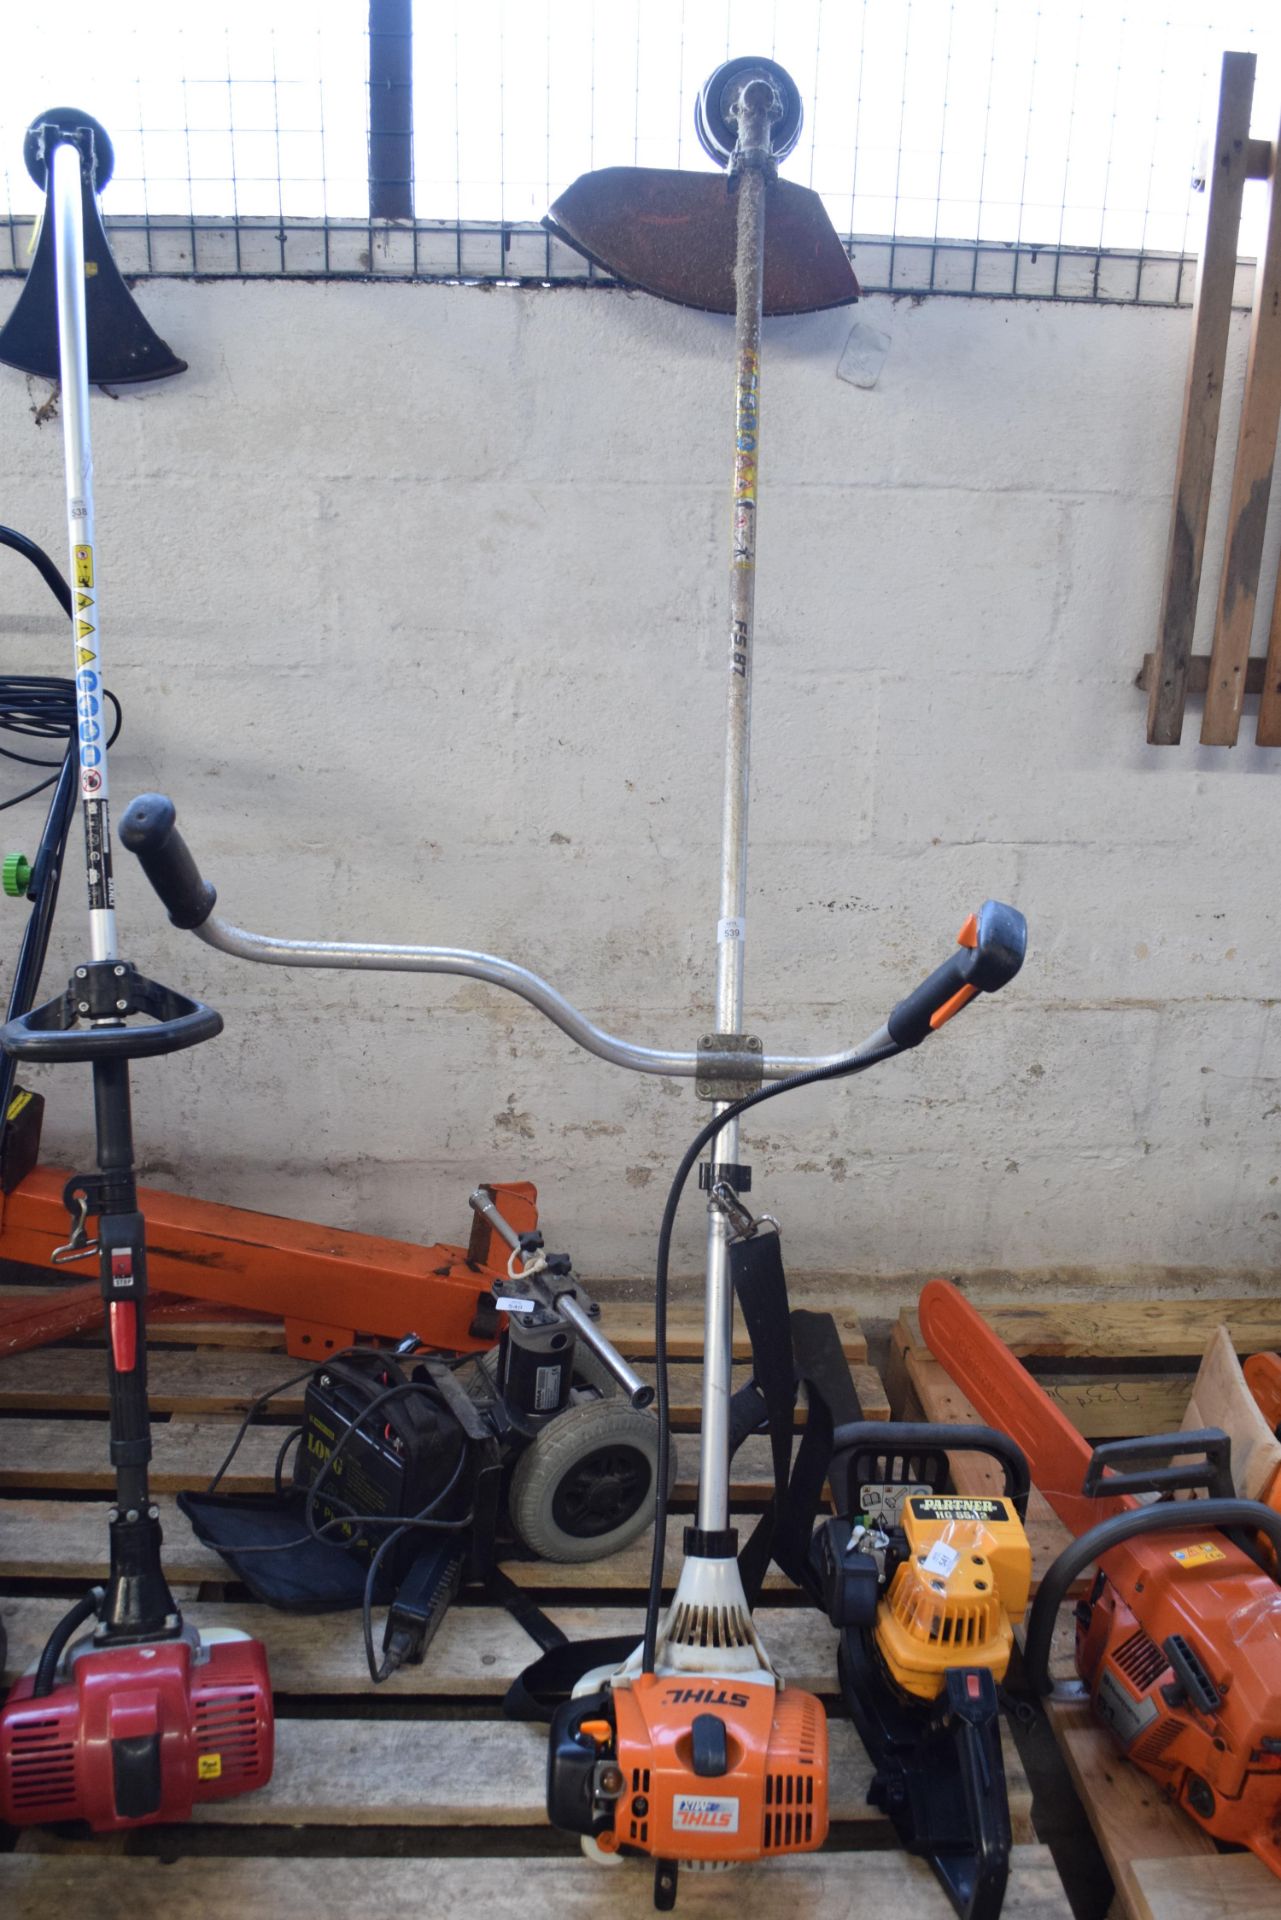 STIHL FS87 PETROL STRIMMER WITH TWO PPE HELMETS